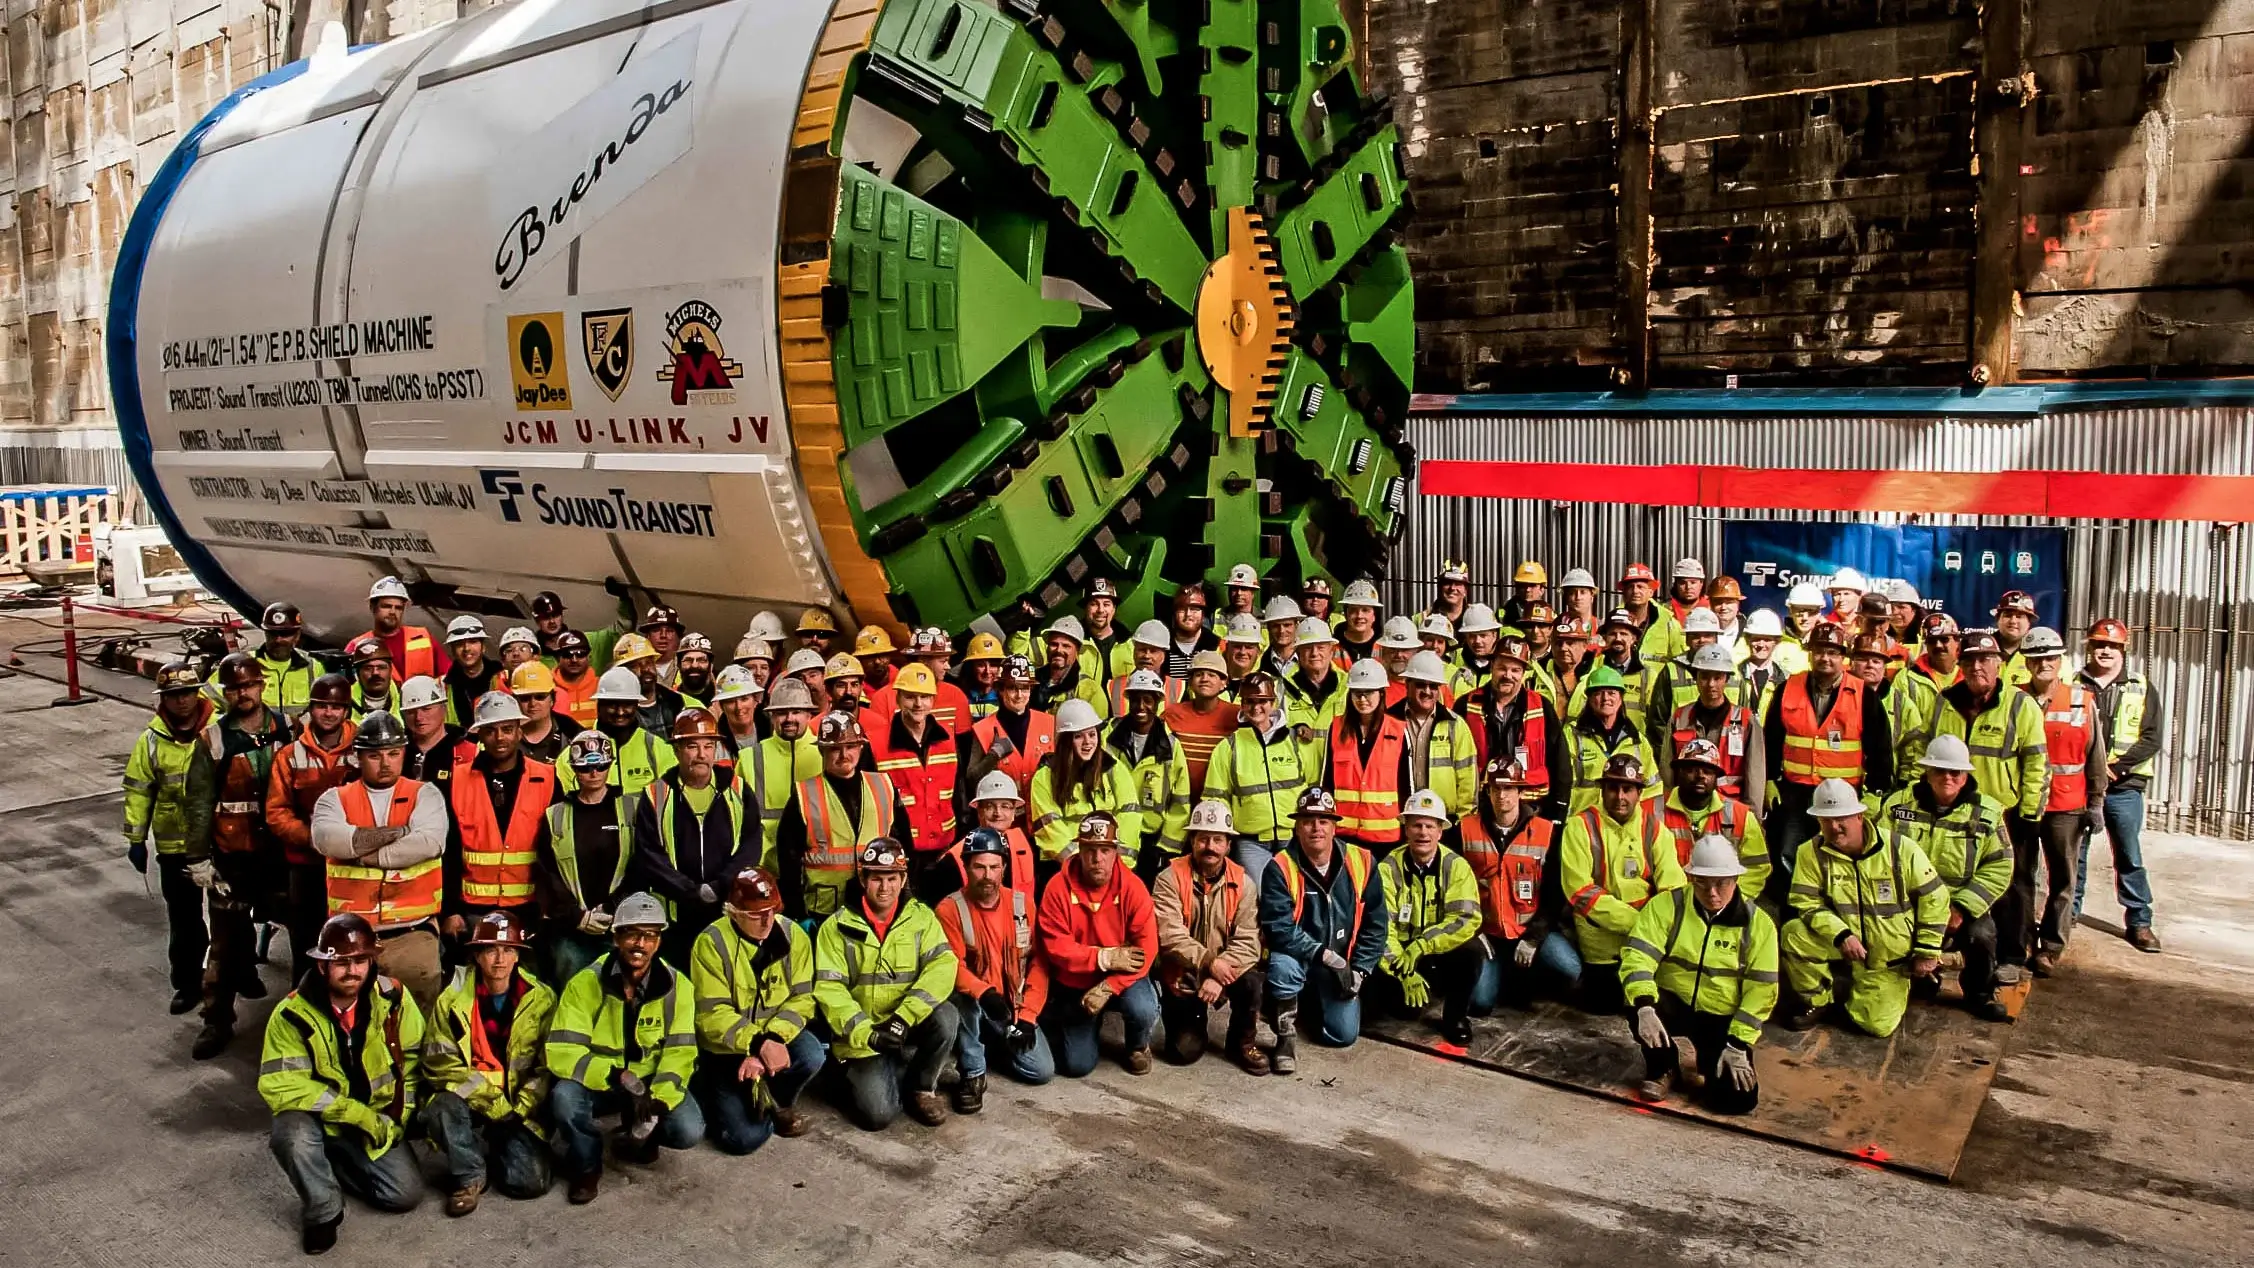 A Michels tunneling crew stands in front of a large tunneling drill.